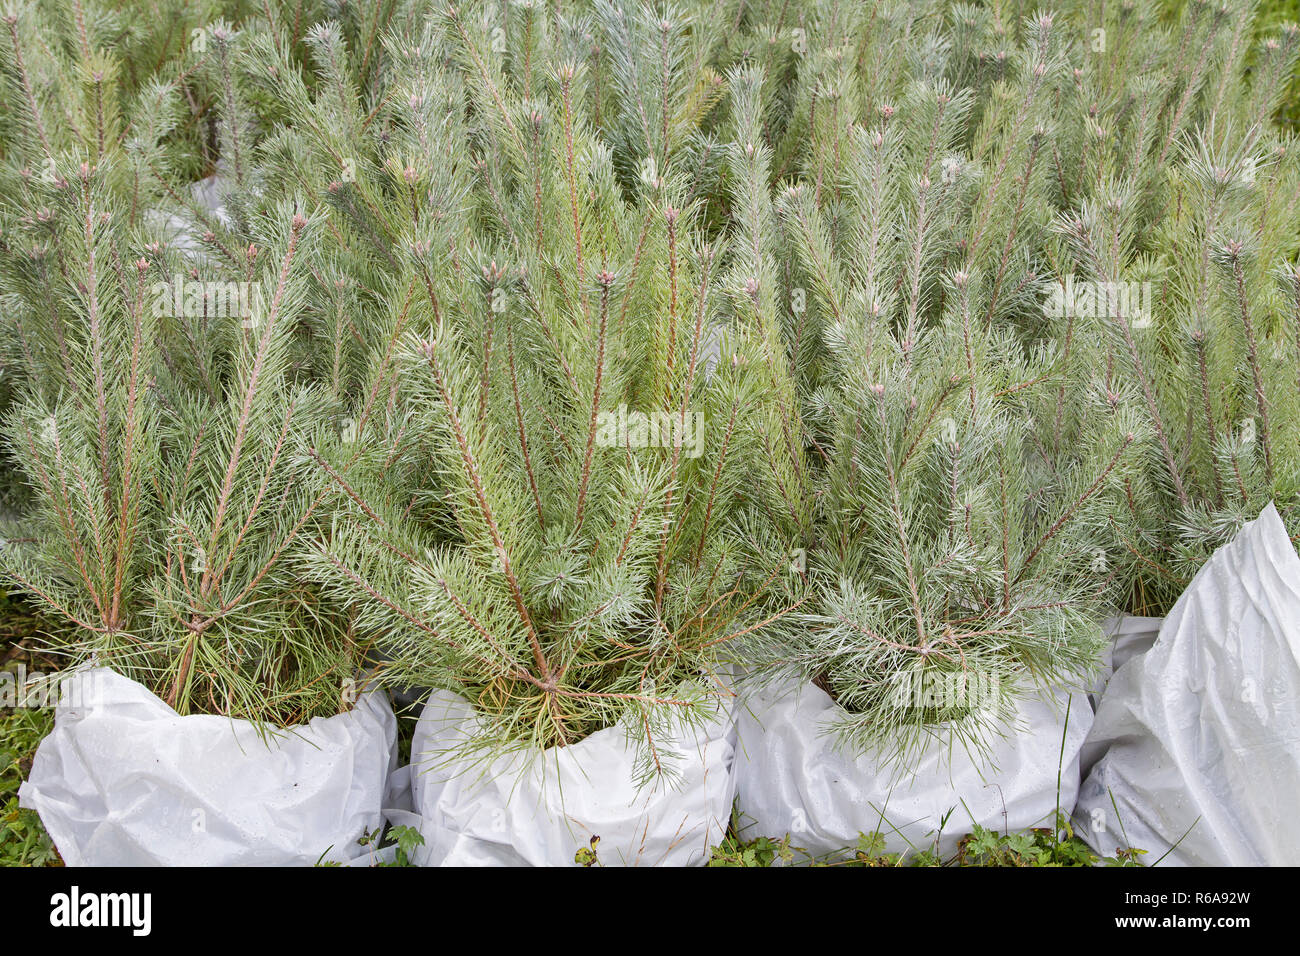 Tree Seedlings For Reforestation Of A Mountain Slope In The Ammergau Alps Stock Photo